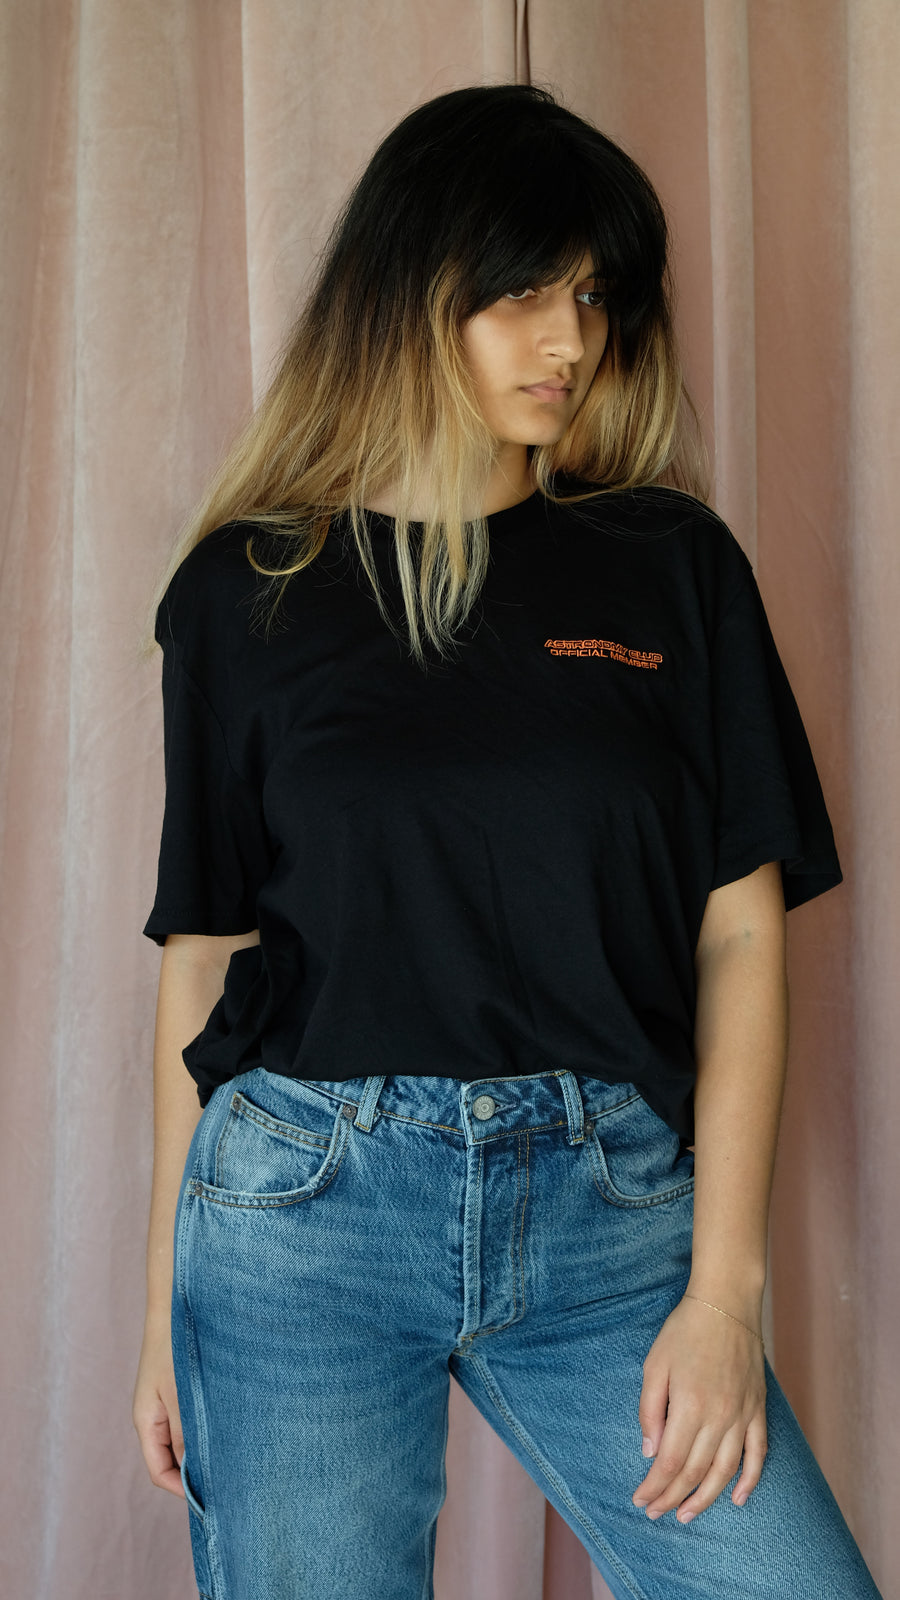 Astronomy Club Official Member Tee Embroidered